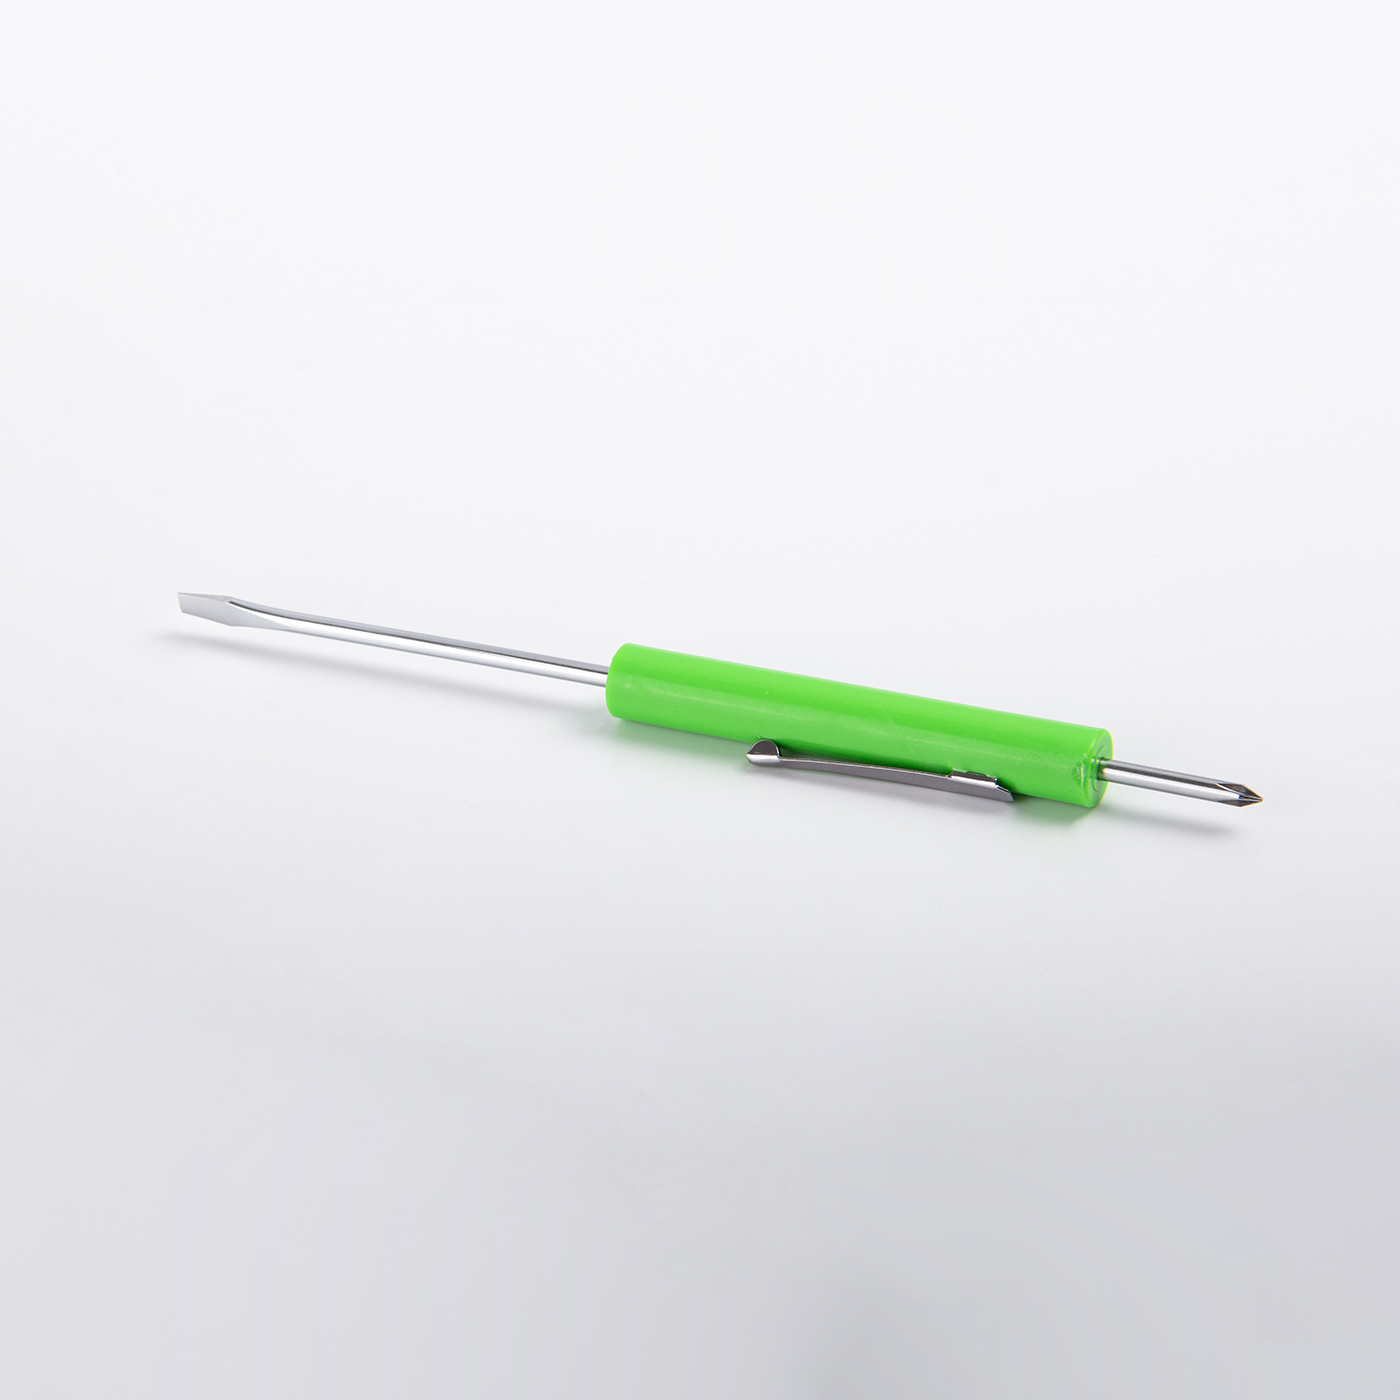 Pocket Double Ended Screwdriver With Clip1